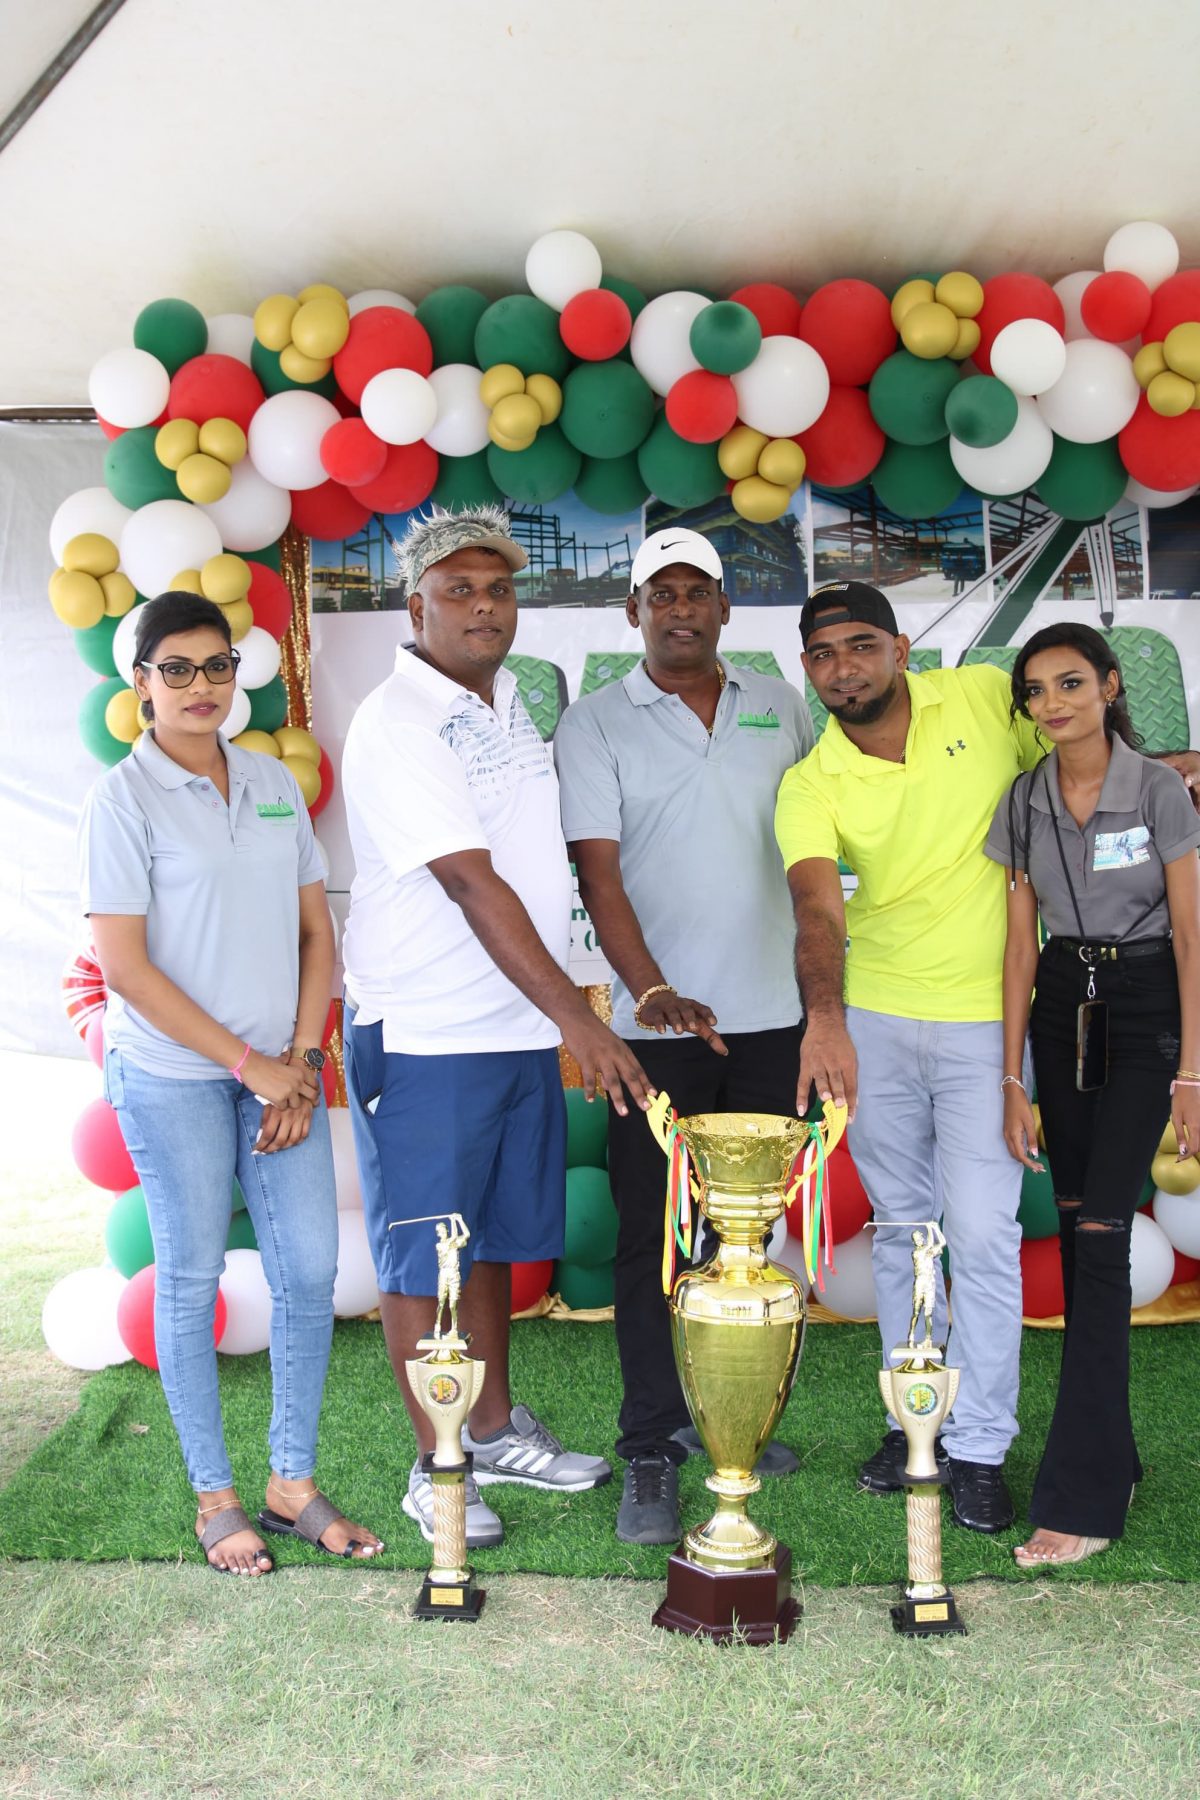 The victorious duo of Romel Bhagwandin (2nd from left) and Robin Tiwari (4th from left) displaying their championship